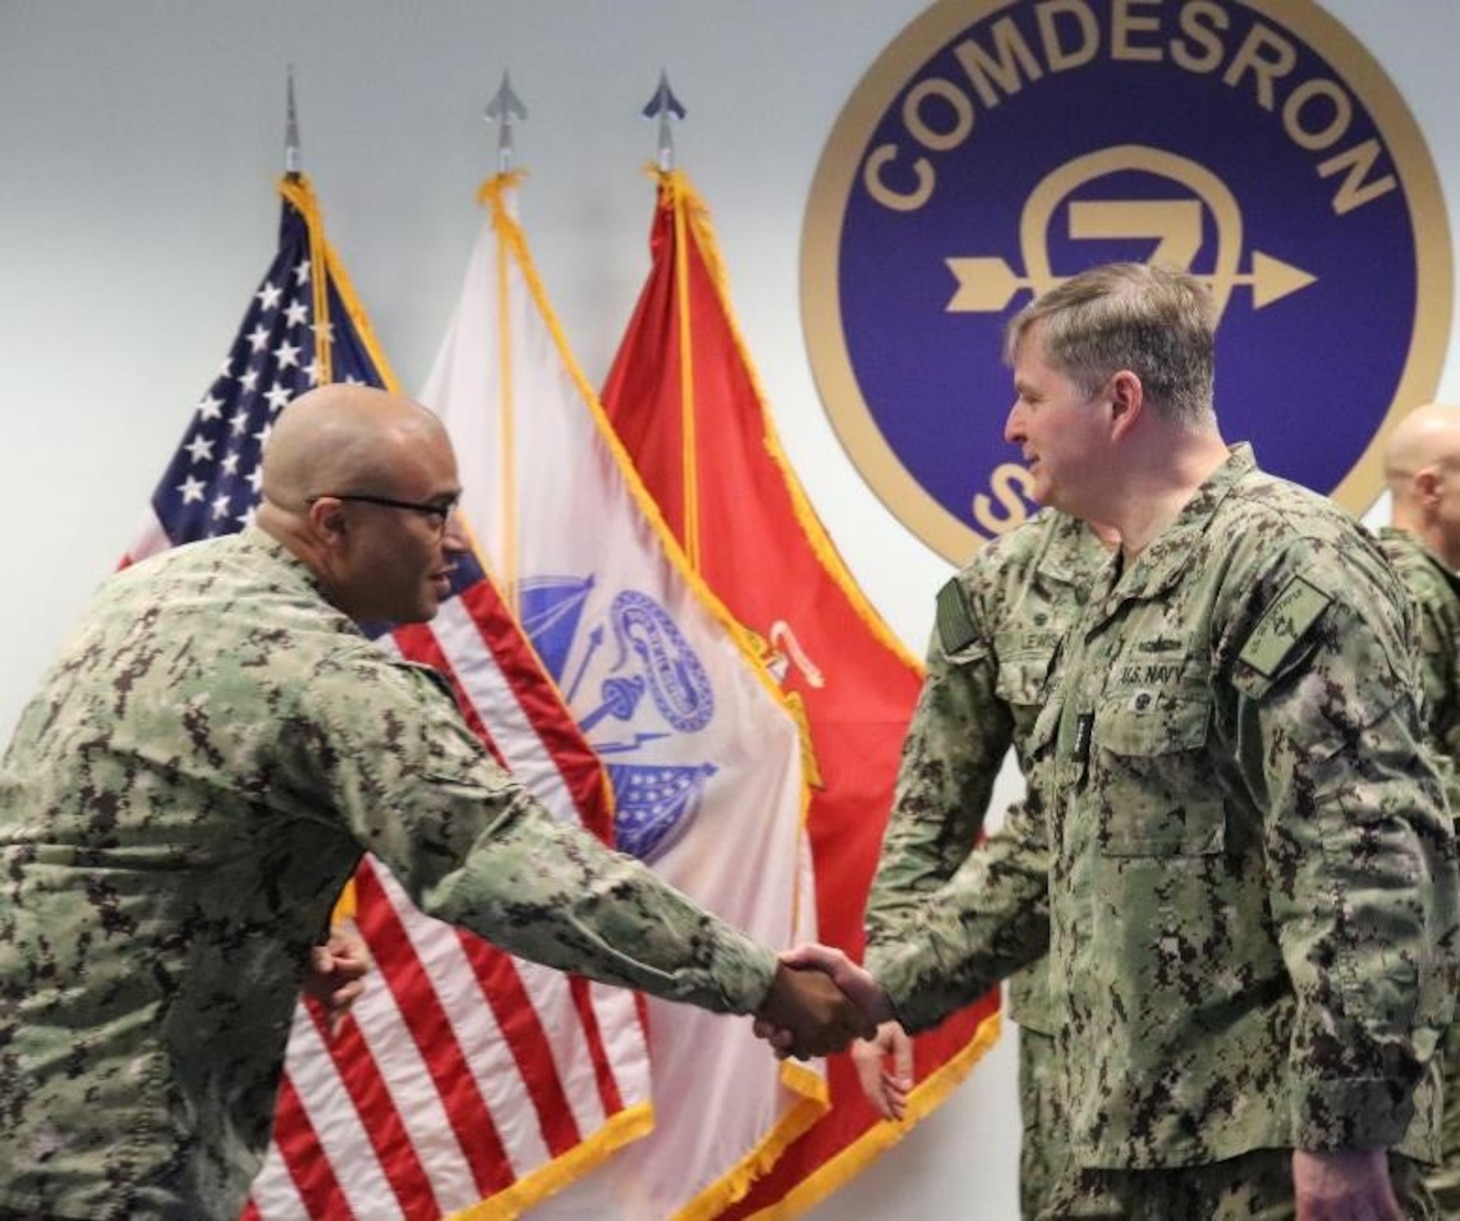 SINGAPORE (March 22, 2024) - Vice Adm. Fred Kacher, right, Commander, U.S. 7th Fleet is greeted by Chief Operations Specialist Jeremy Harris during a visit to Commander, Destroyer Squadron (DESRON) 7 , March 22. As the U.S. Navy’s destroyer squadron forward-deployed in Southeast Asia, DESRON 7 serves as the primary tactical and operational commander of littoral combat ships rotationally deployed to Singapore, Expeditionary Strike Group 7’s Sea Combat Commander and builds partnerships through training exercises and military-to-military engagements. (U.S. Navy photo by Lt. j.g. Rebecca Moore)